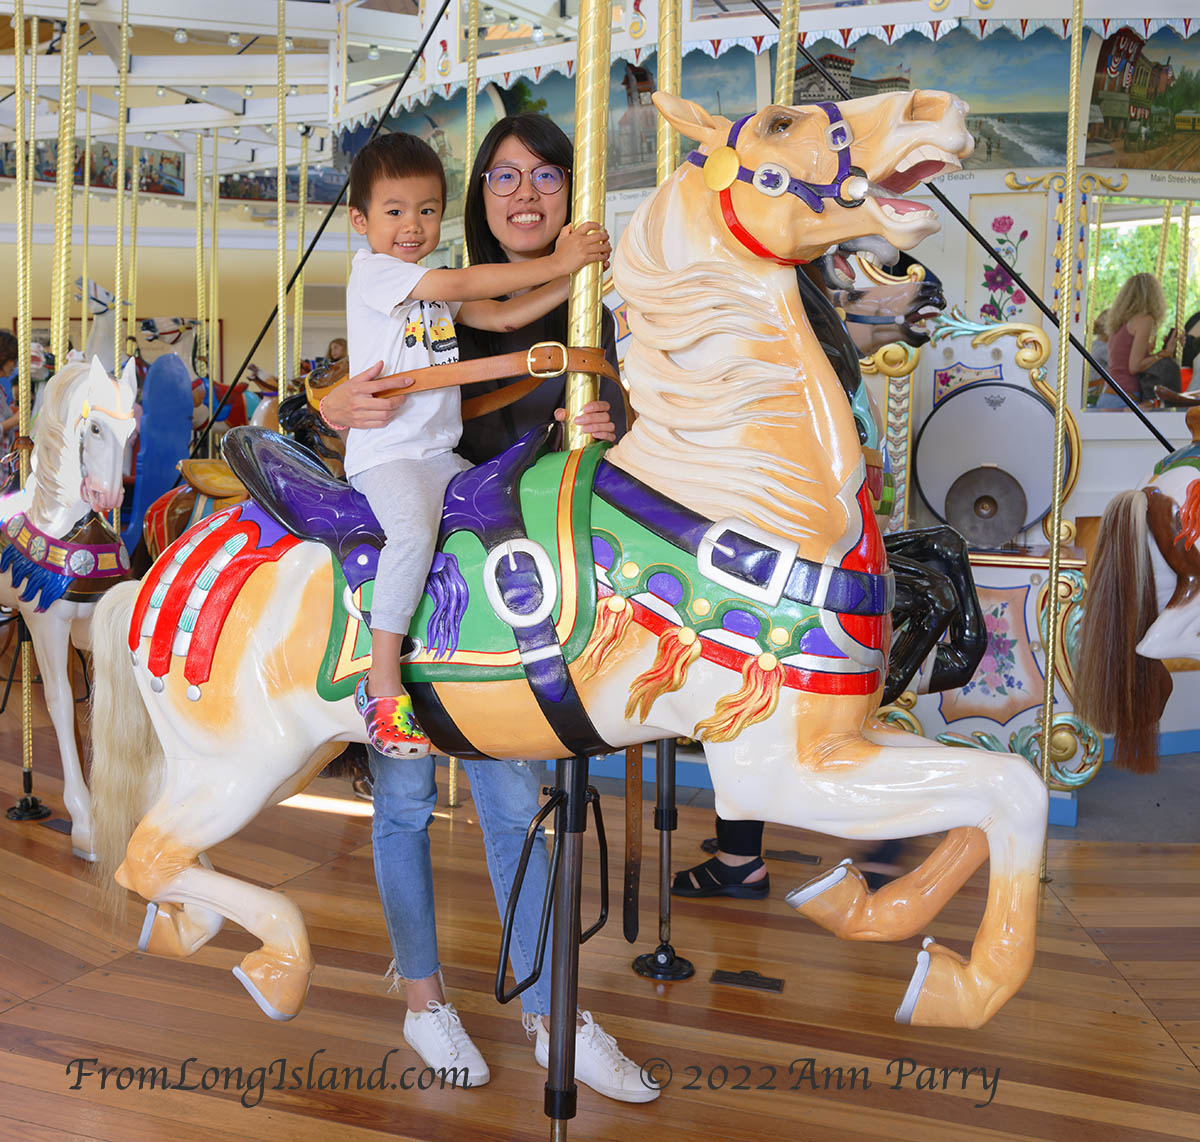 Garden City, New York, U.S. August 16, 2022. AARON, 2, of East Meadow, rides on a horse, with his mother holding him, when historic Nunley's Carousel officially reopens after Covid-19 pandemic forced it to close in 2020. (© 2022 Ann Parry, annparry.com)